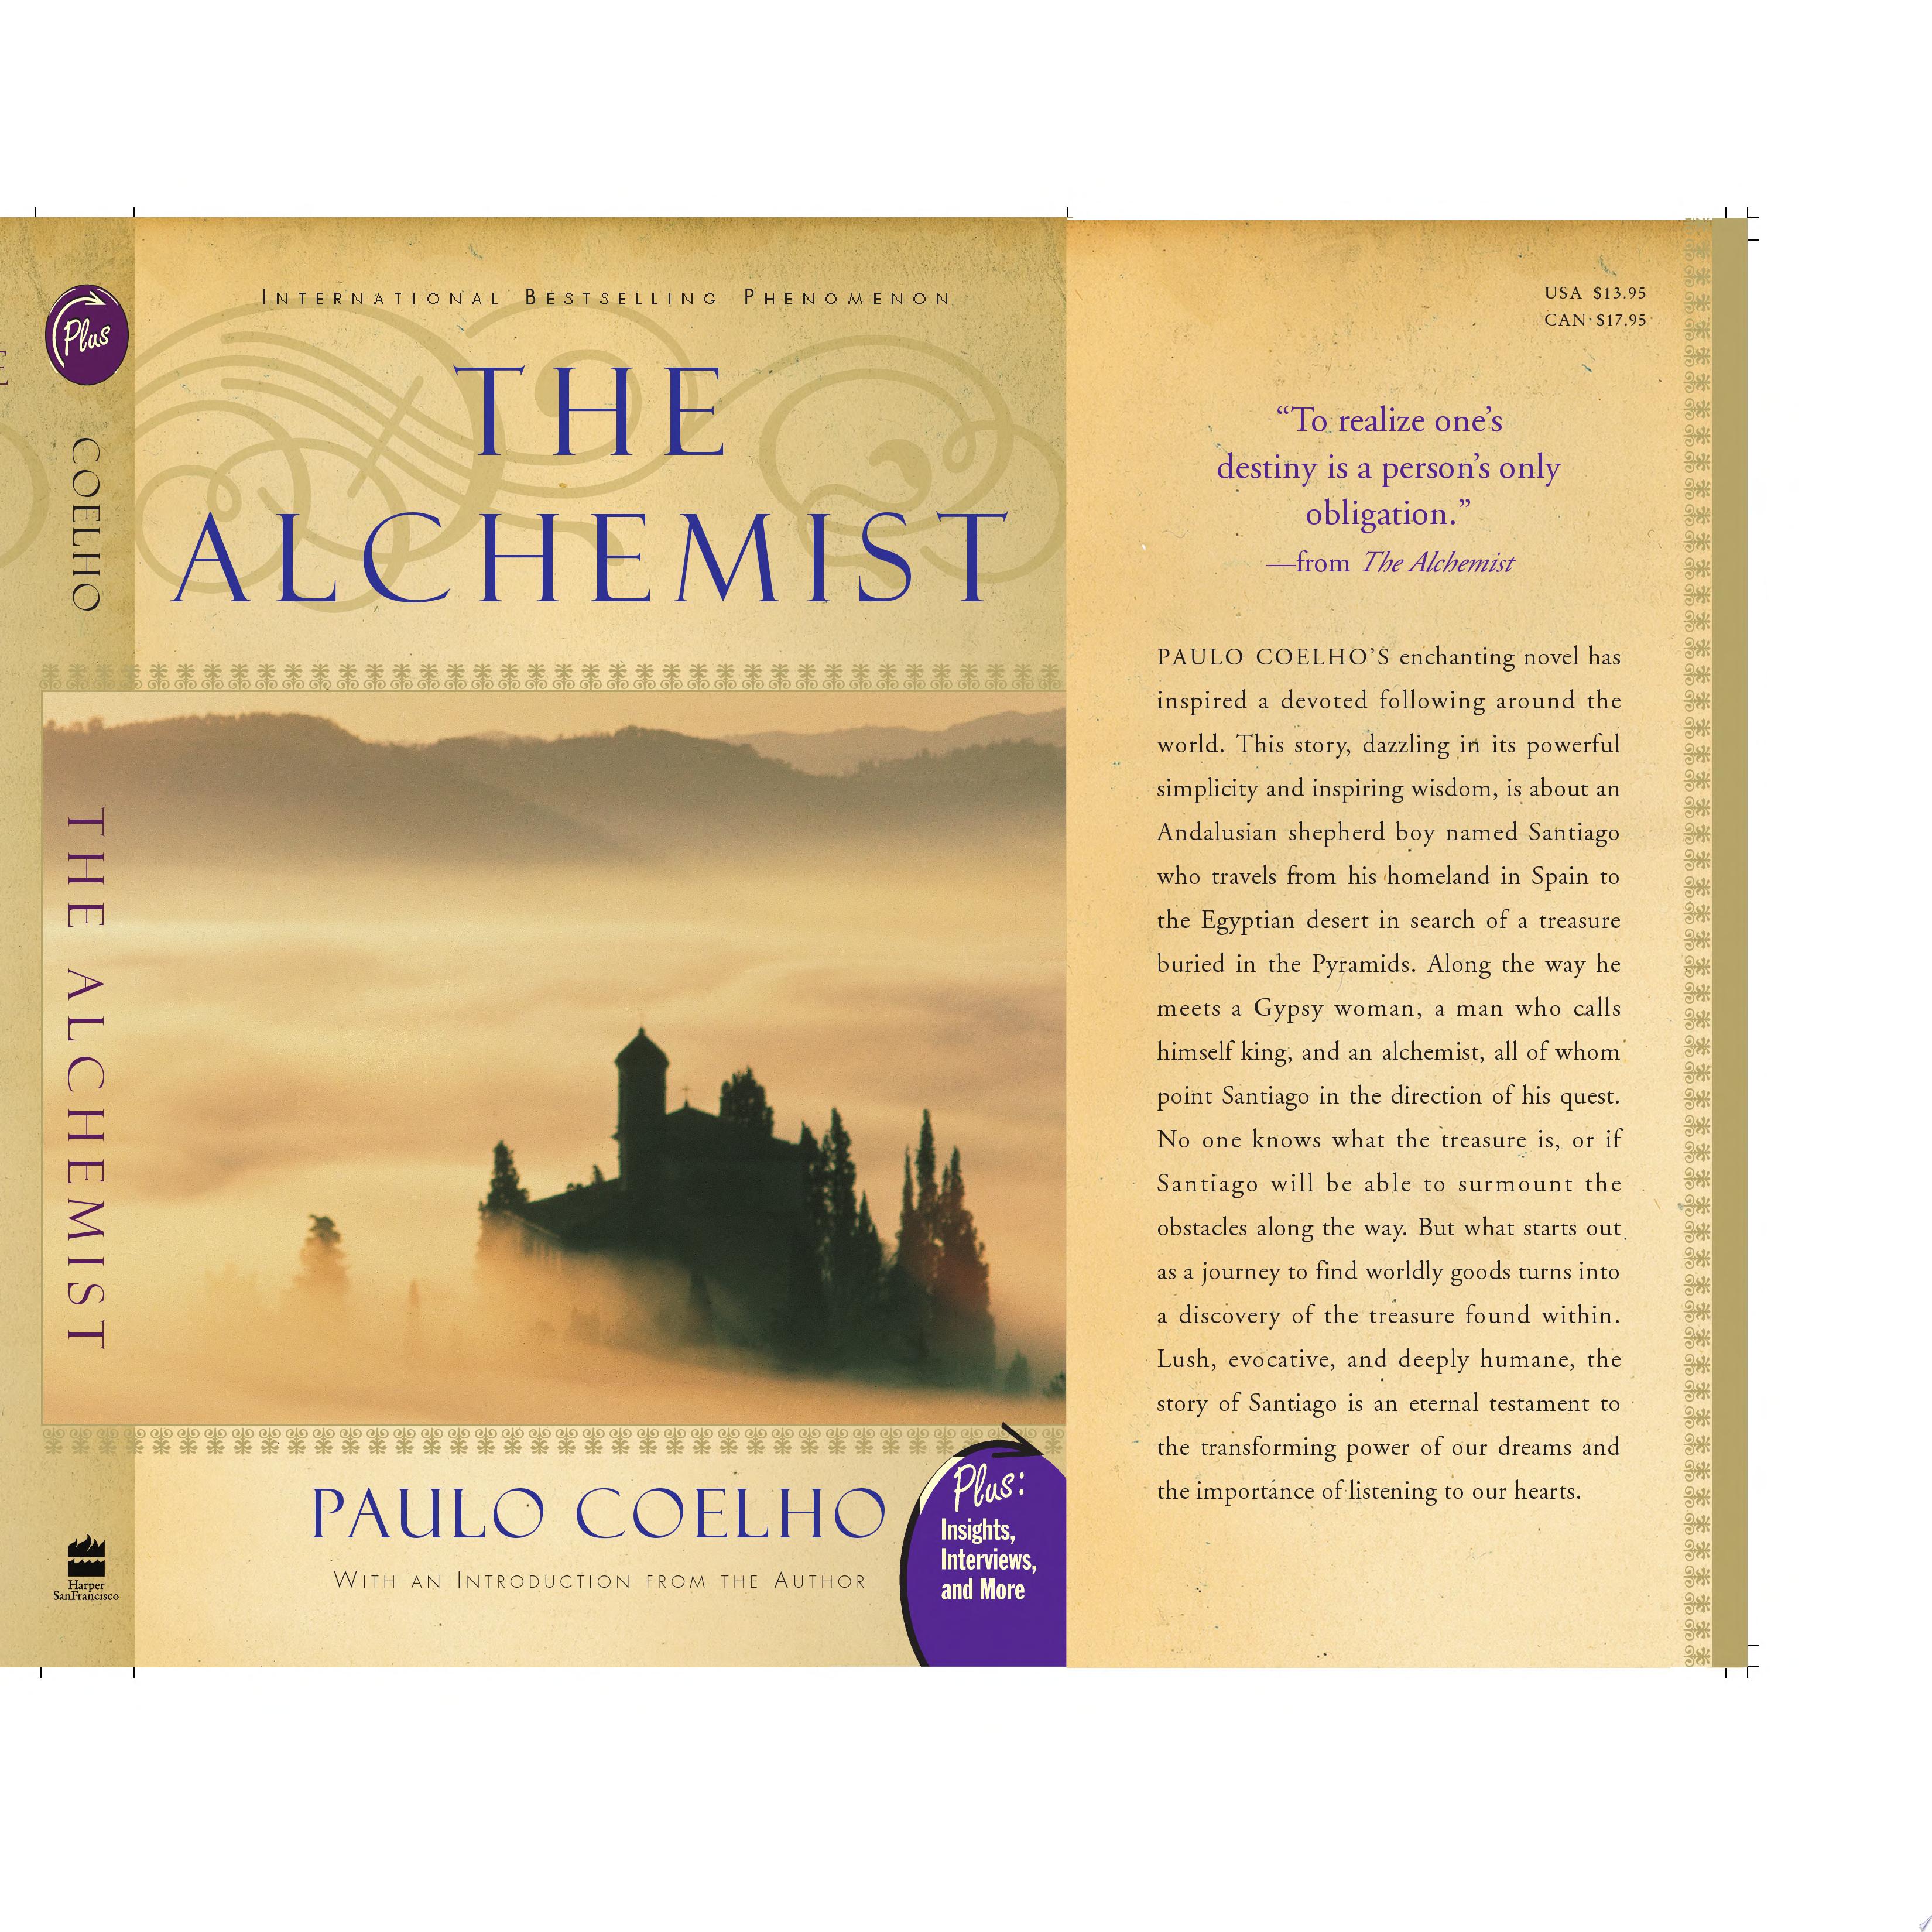 Image for "The Alchemist"